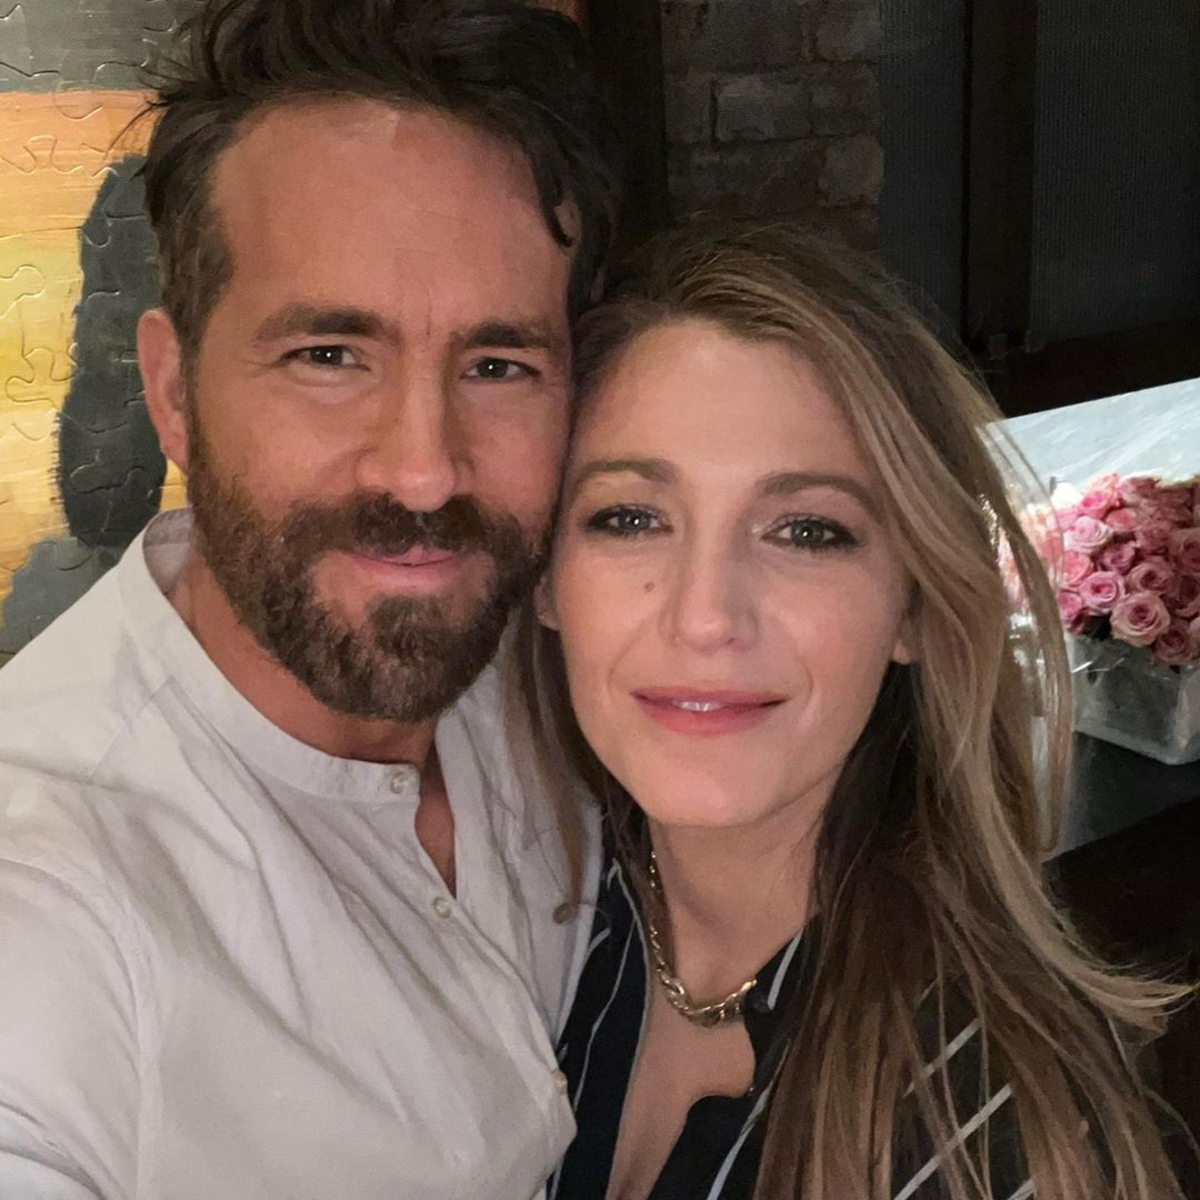 You Know You’ll Love Ryan Reynolds’ Birthday Tribute to Blake Lively